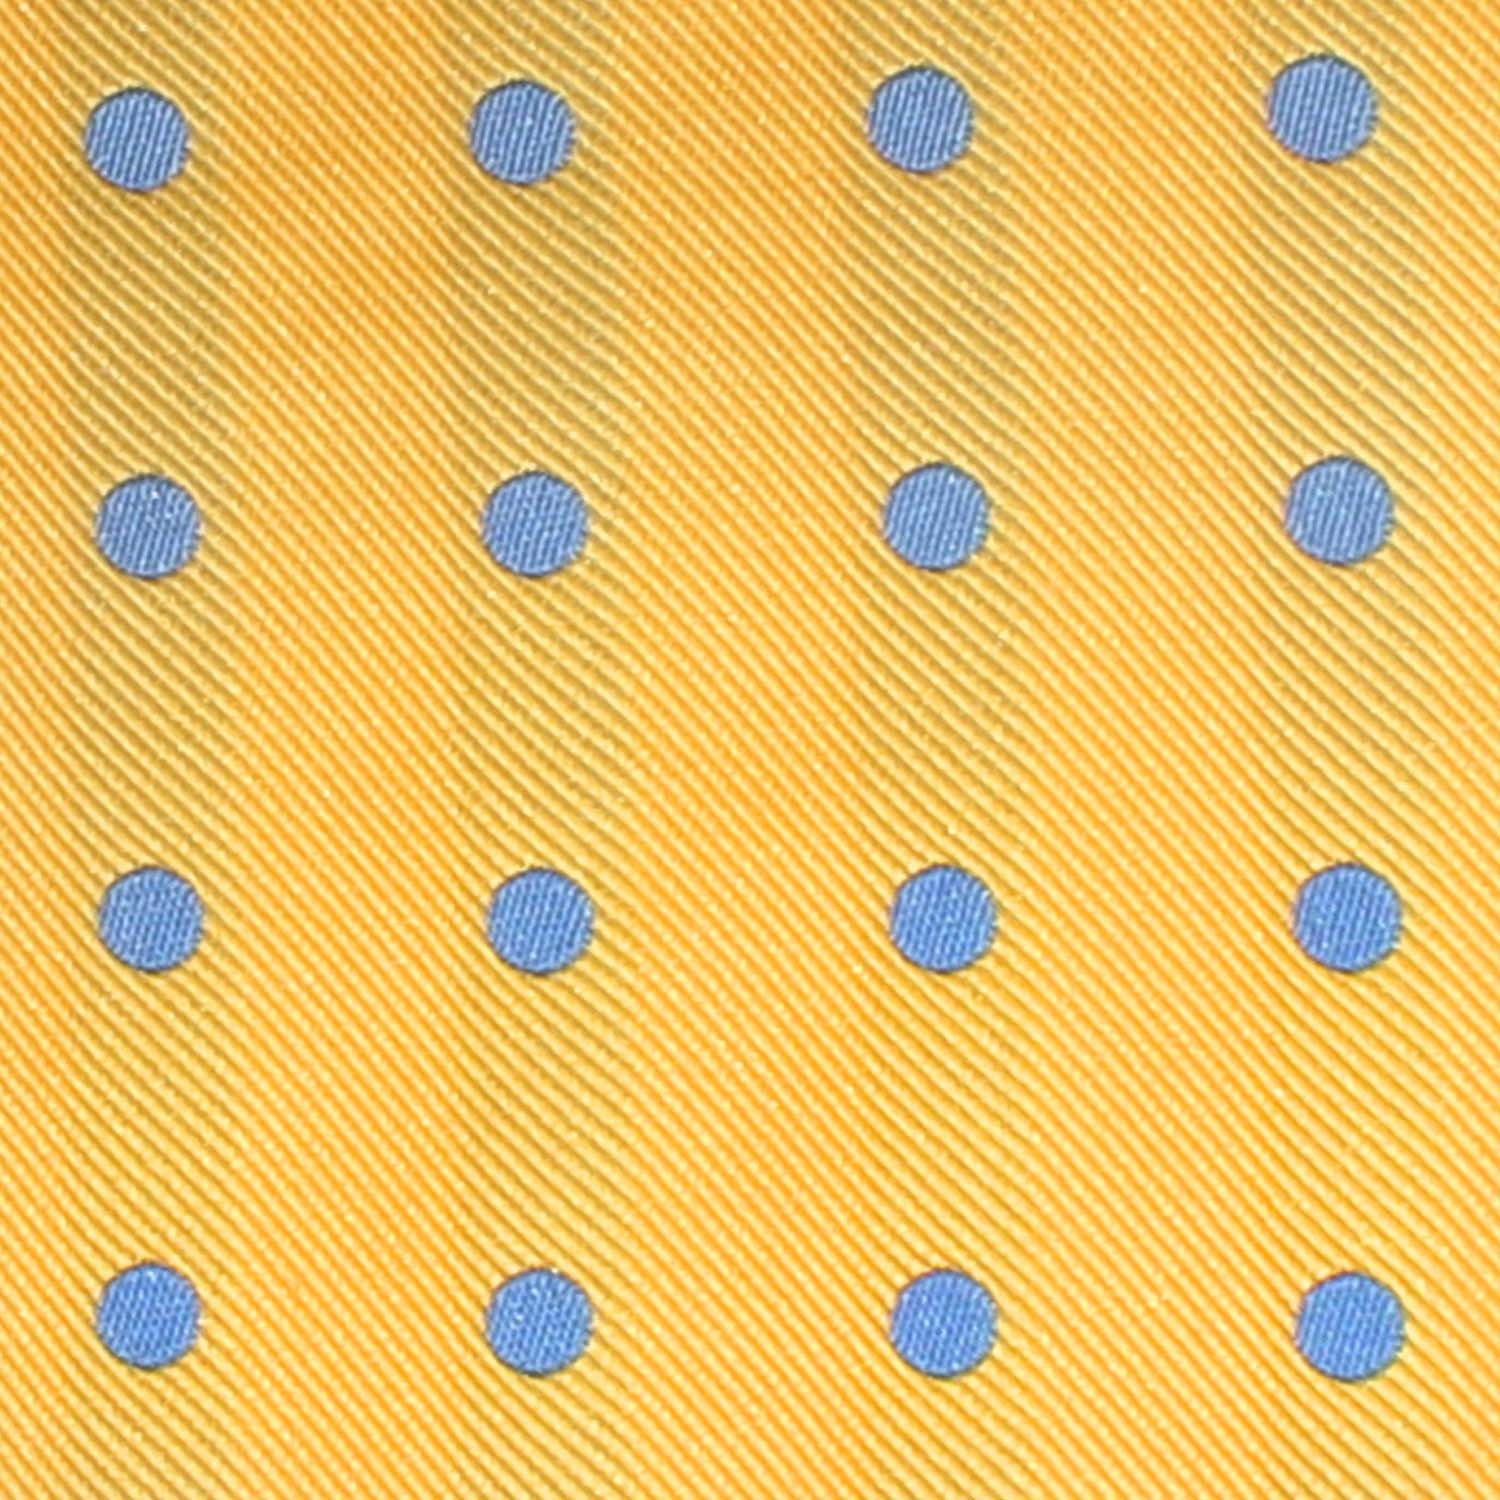 Yellow with Light Blue Polka Dots Fabric Skinny Tie X691Yellow with Light Blue Polka Dots Fabric Skinny Tie X691